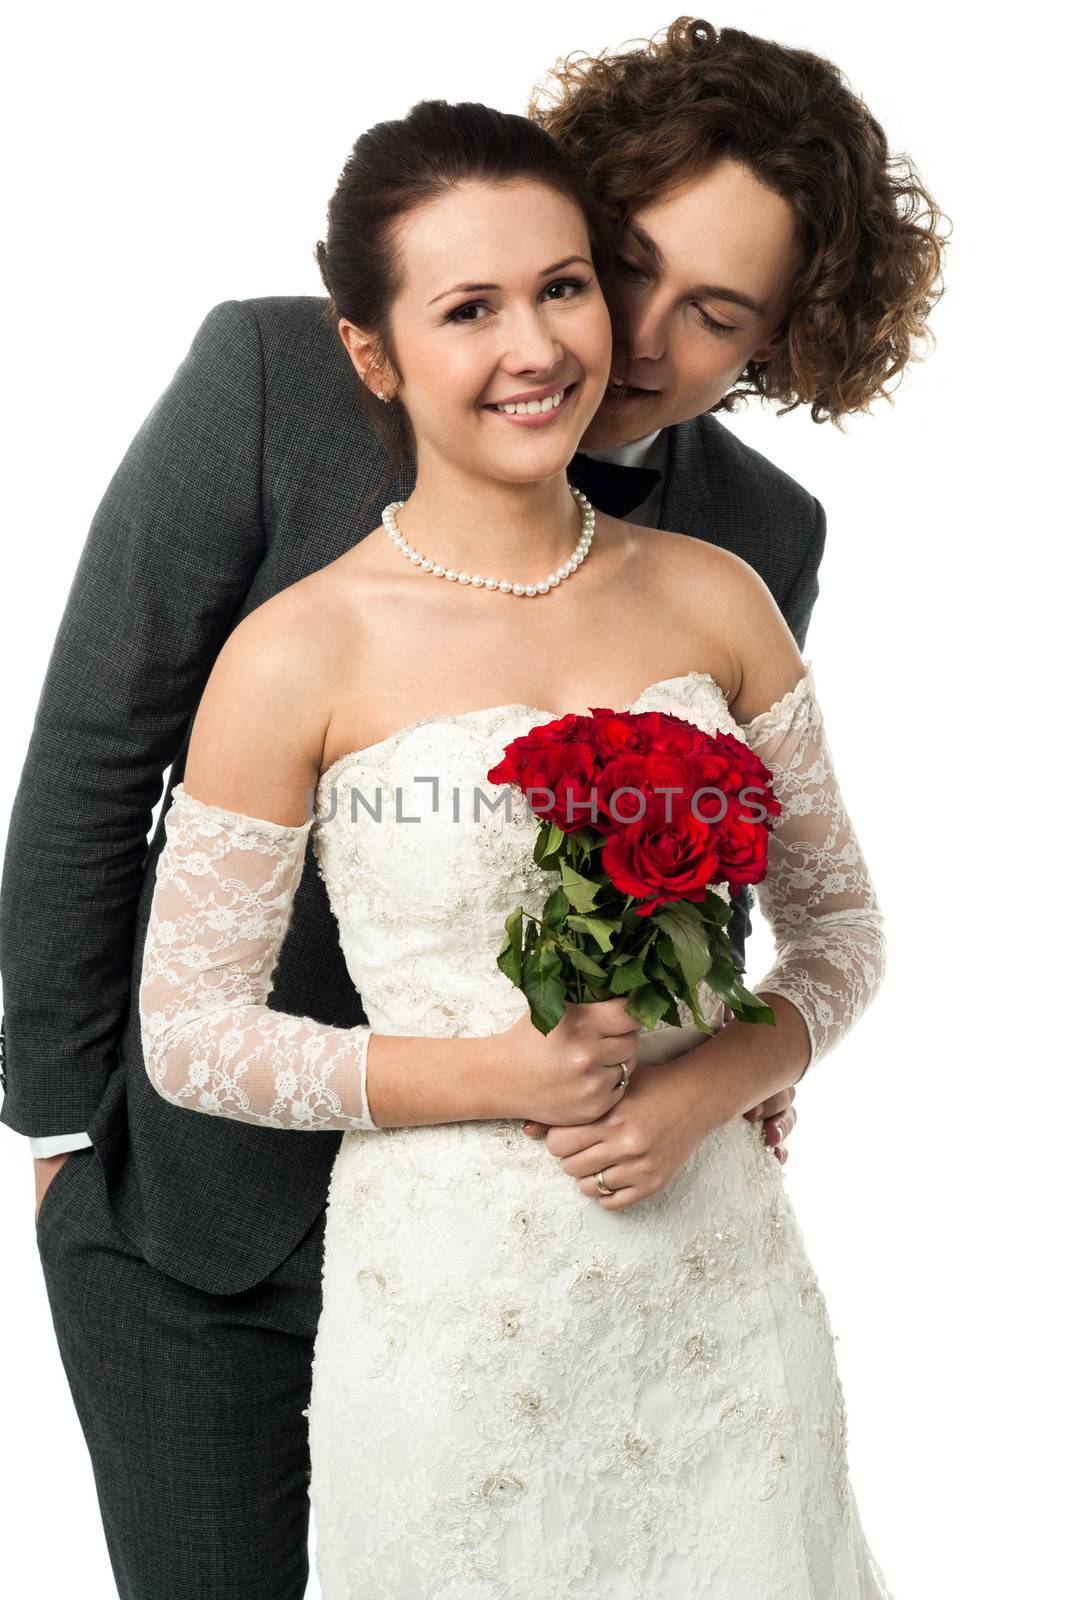 Man whispering into the ears of a bride